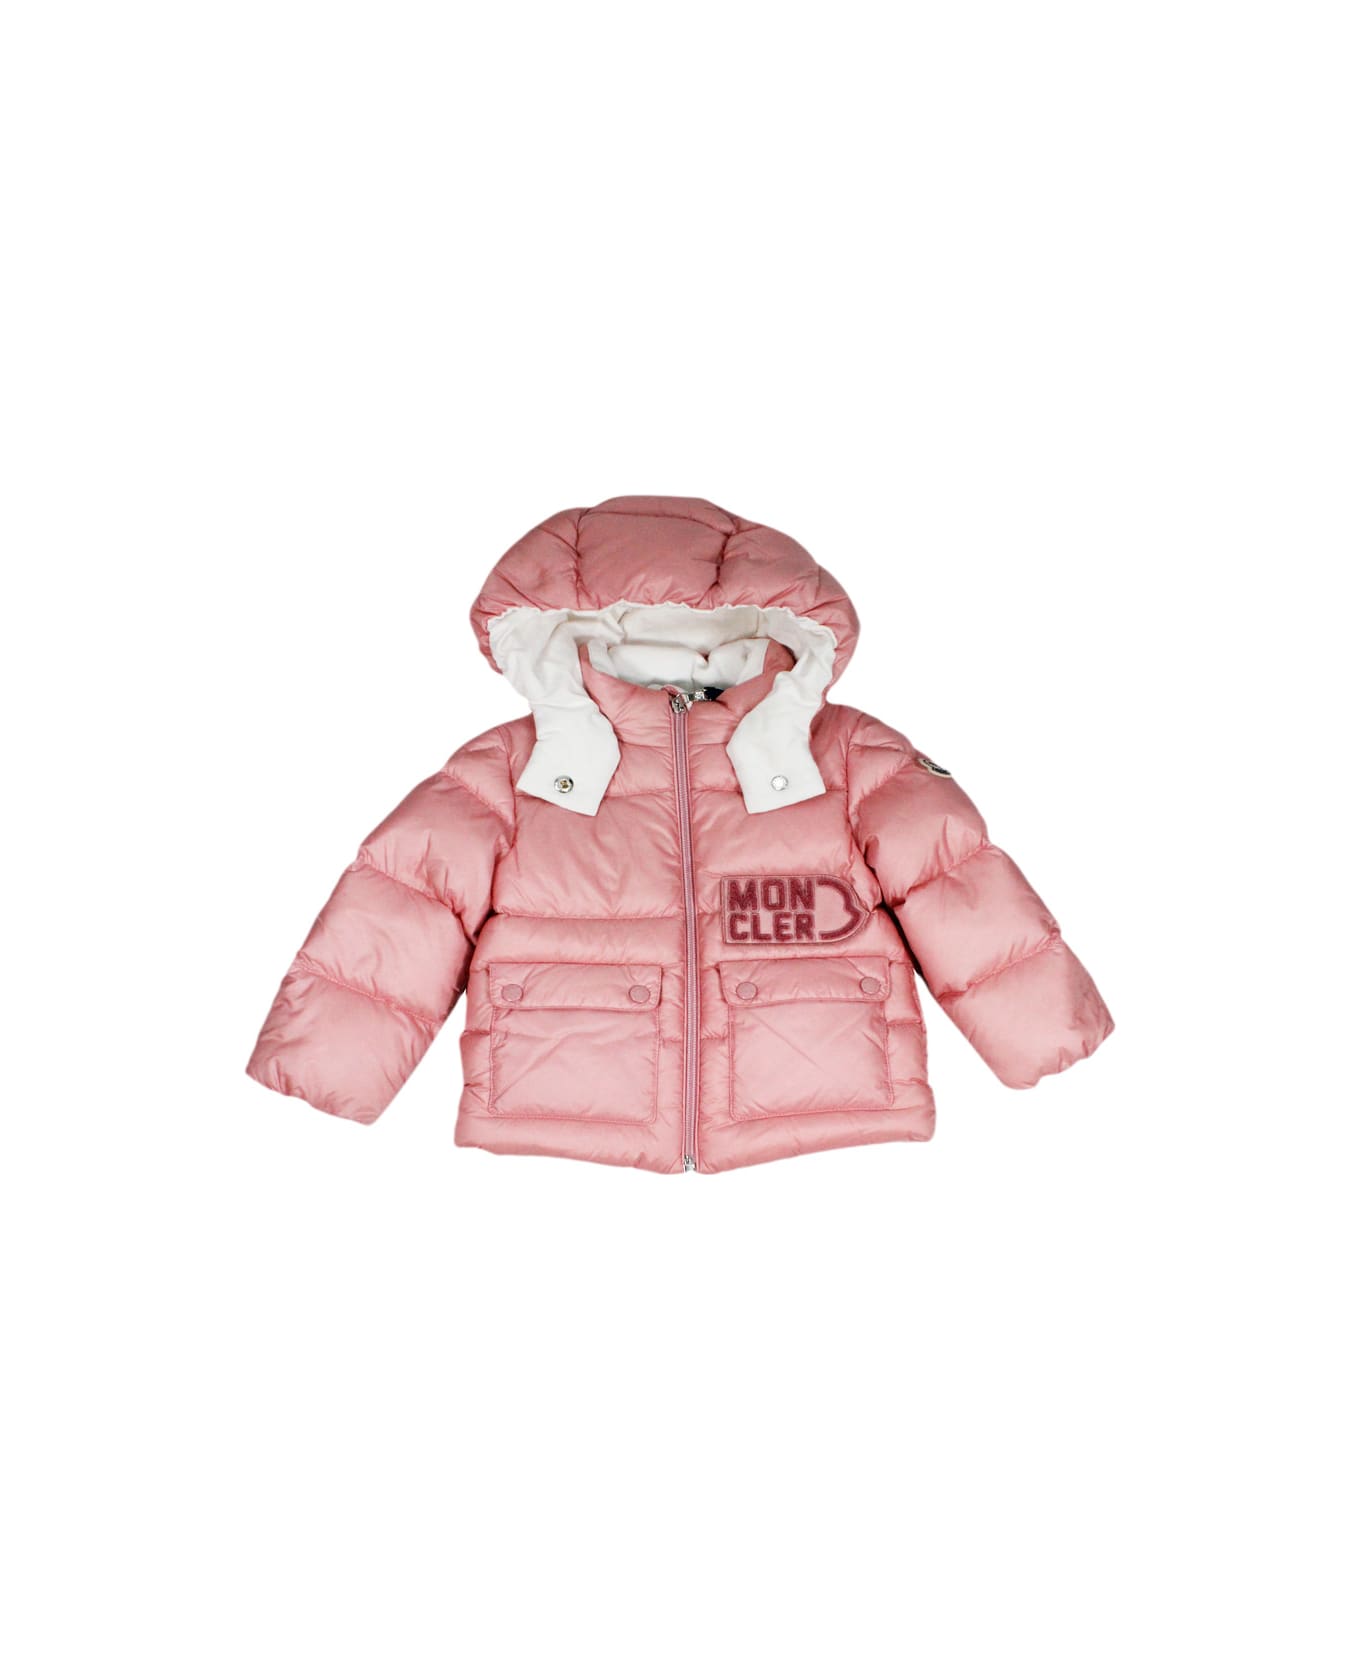 Moncler Abbaye Down Jacket Padded With Real Goose Down With Detachable Hood, Zip Closure And Pockets On The Front - Pink コート＆ジャケット